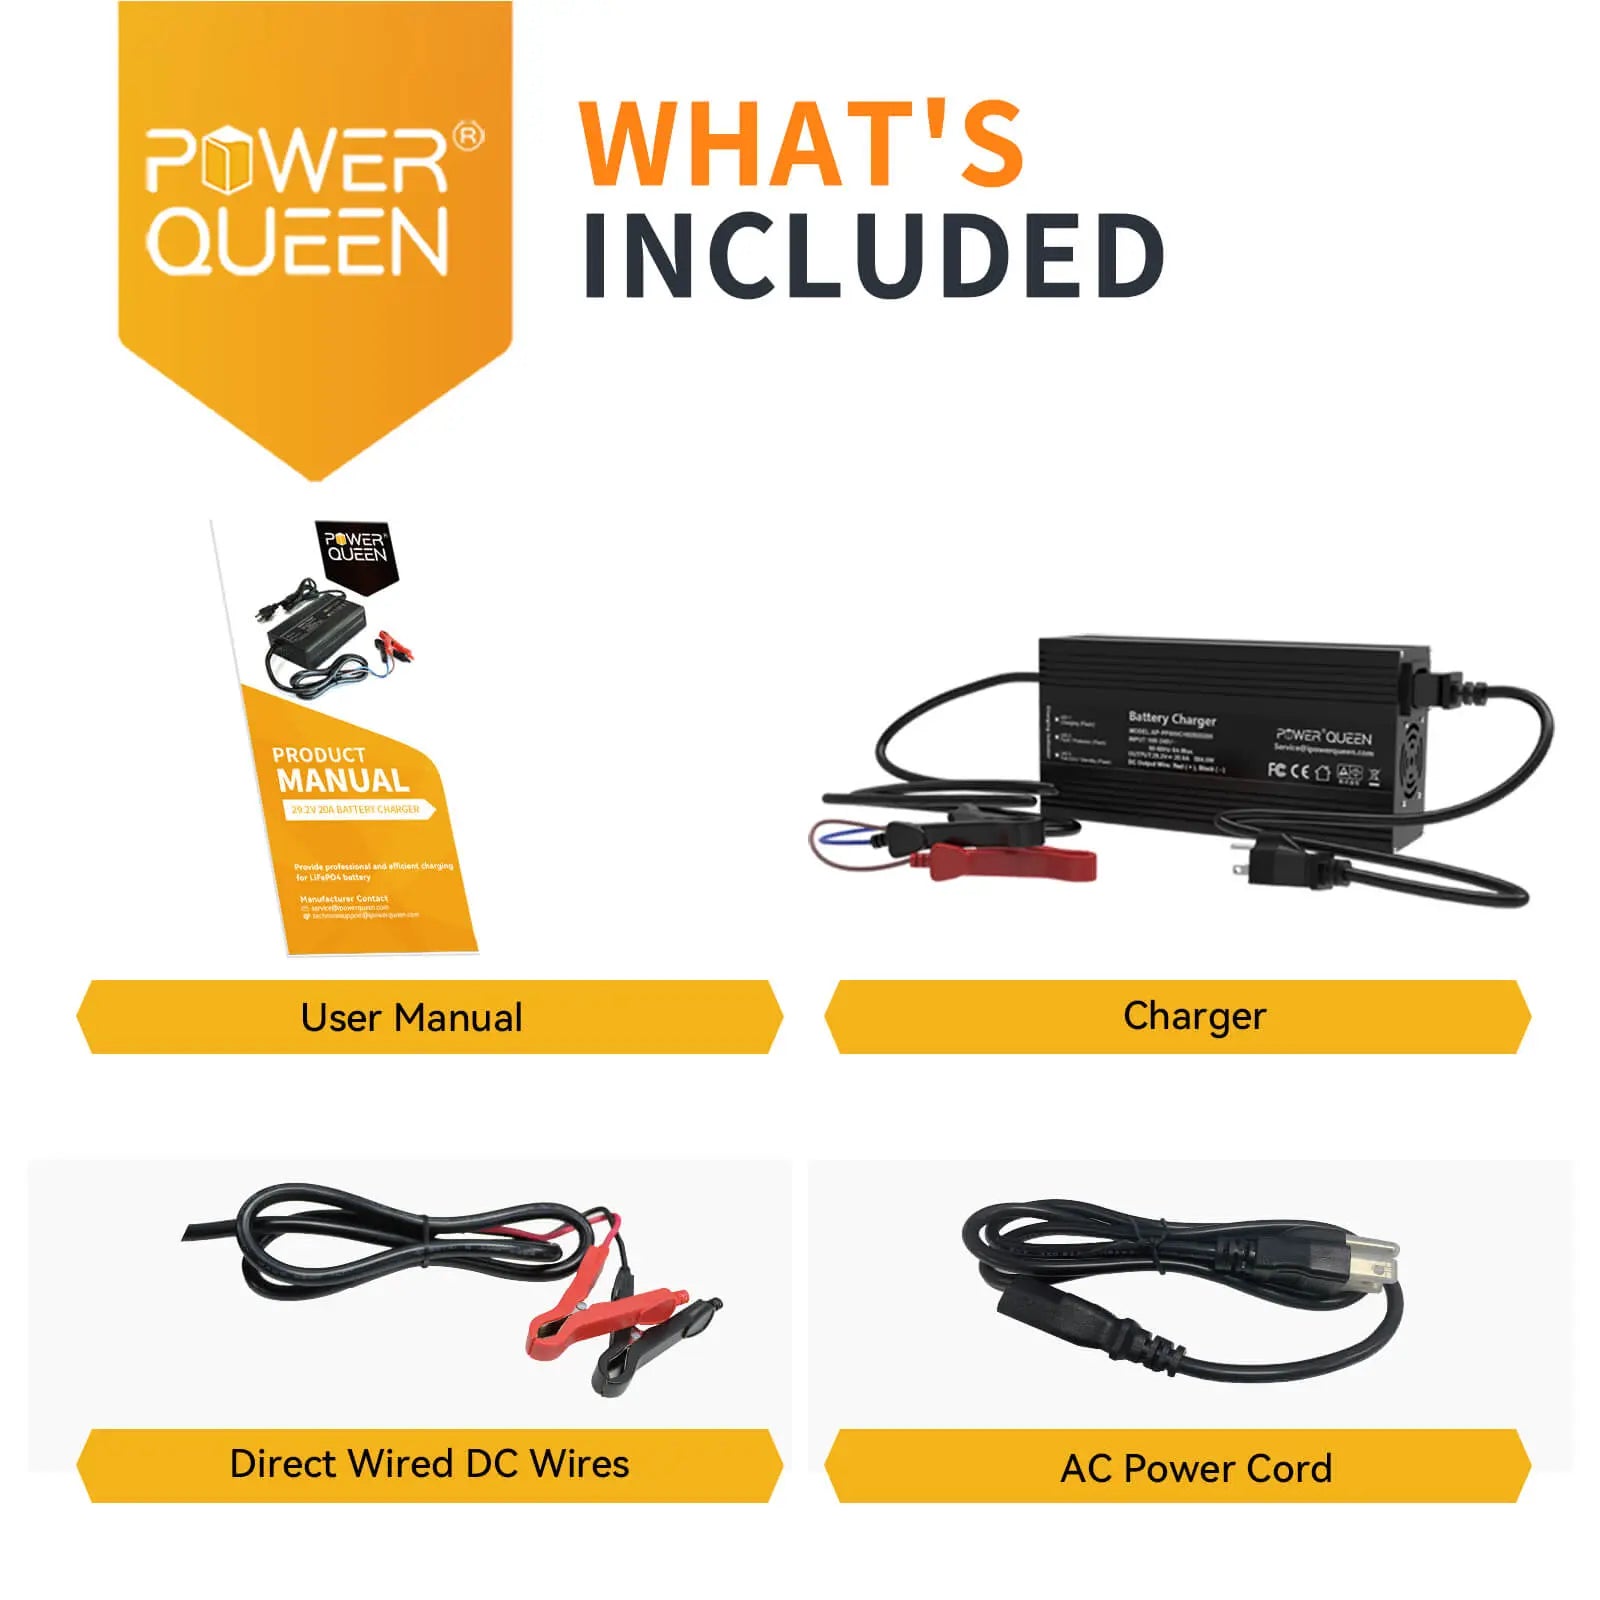 POWER QUEEN 29.2V 20Amp Lithium LiFePO4 Battery Charger Power Queen